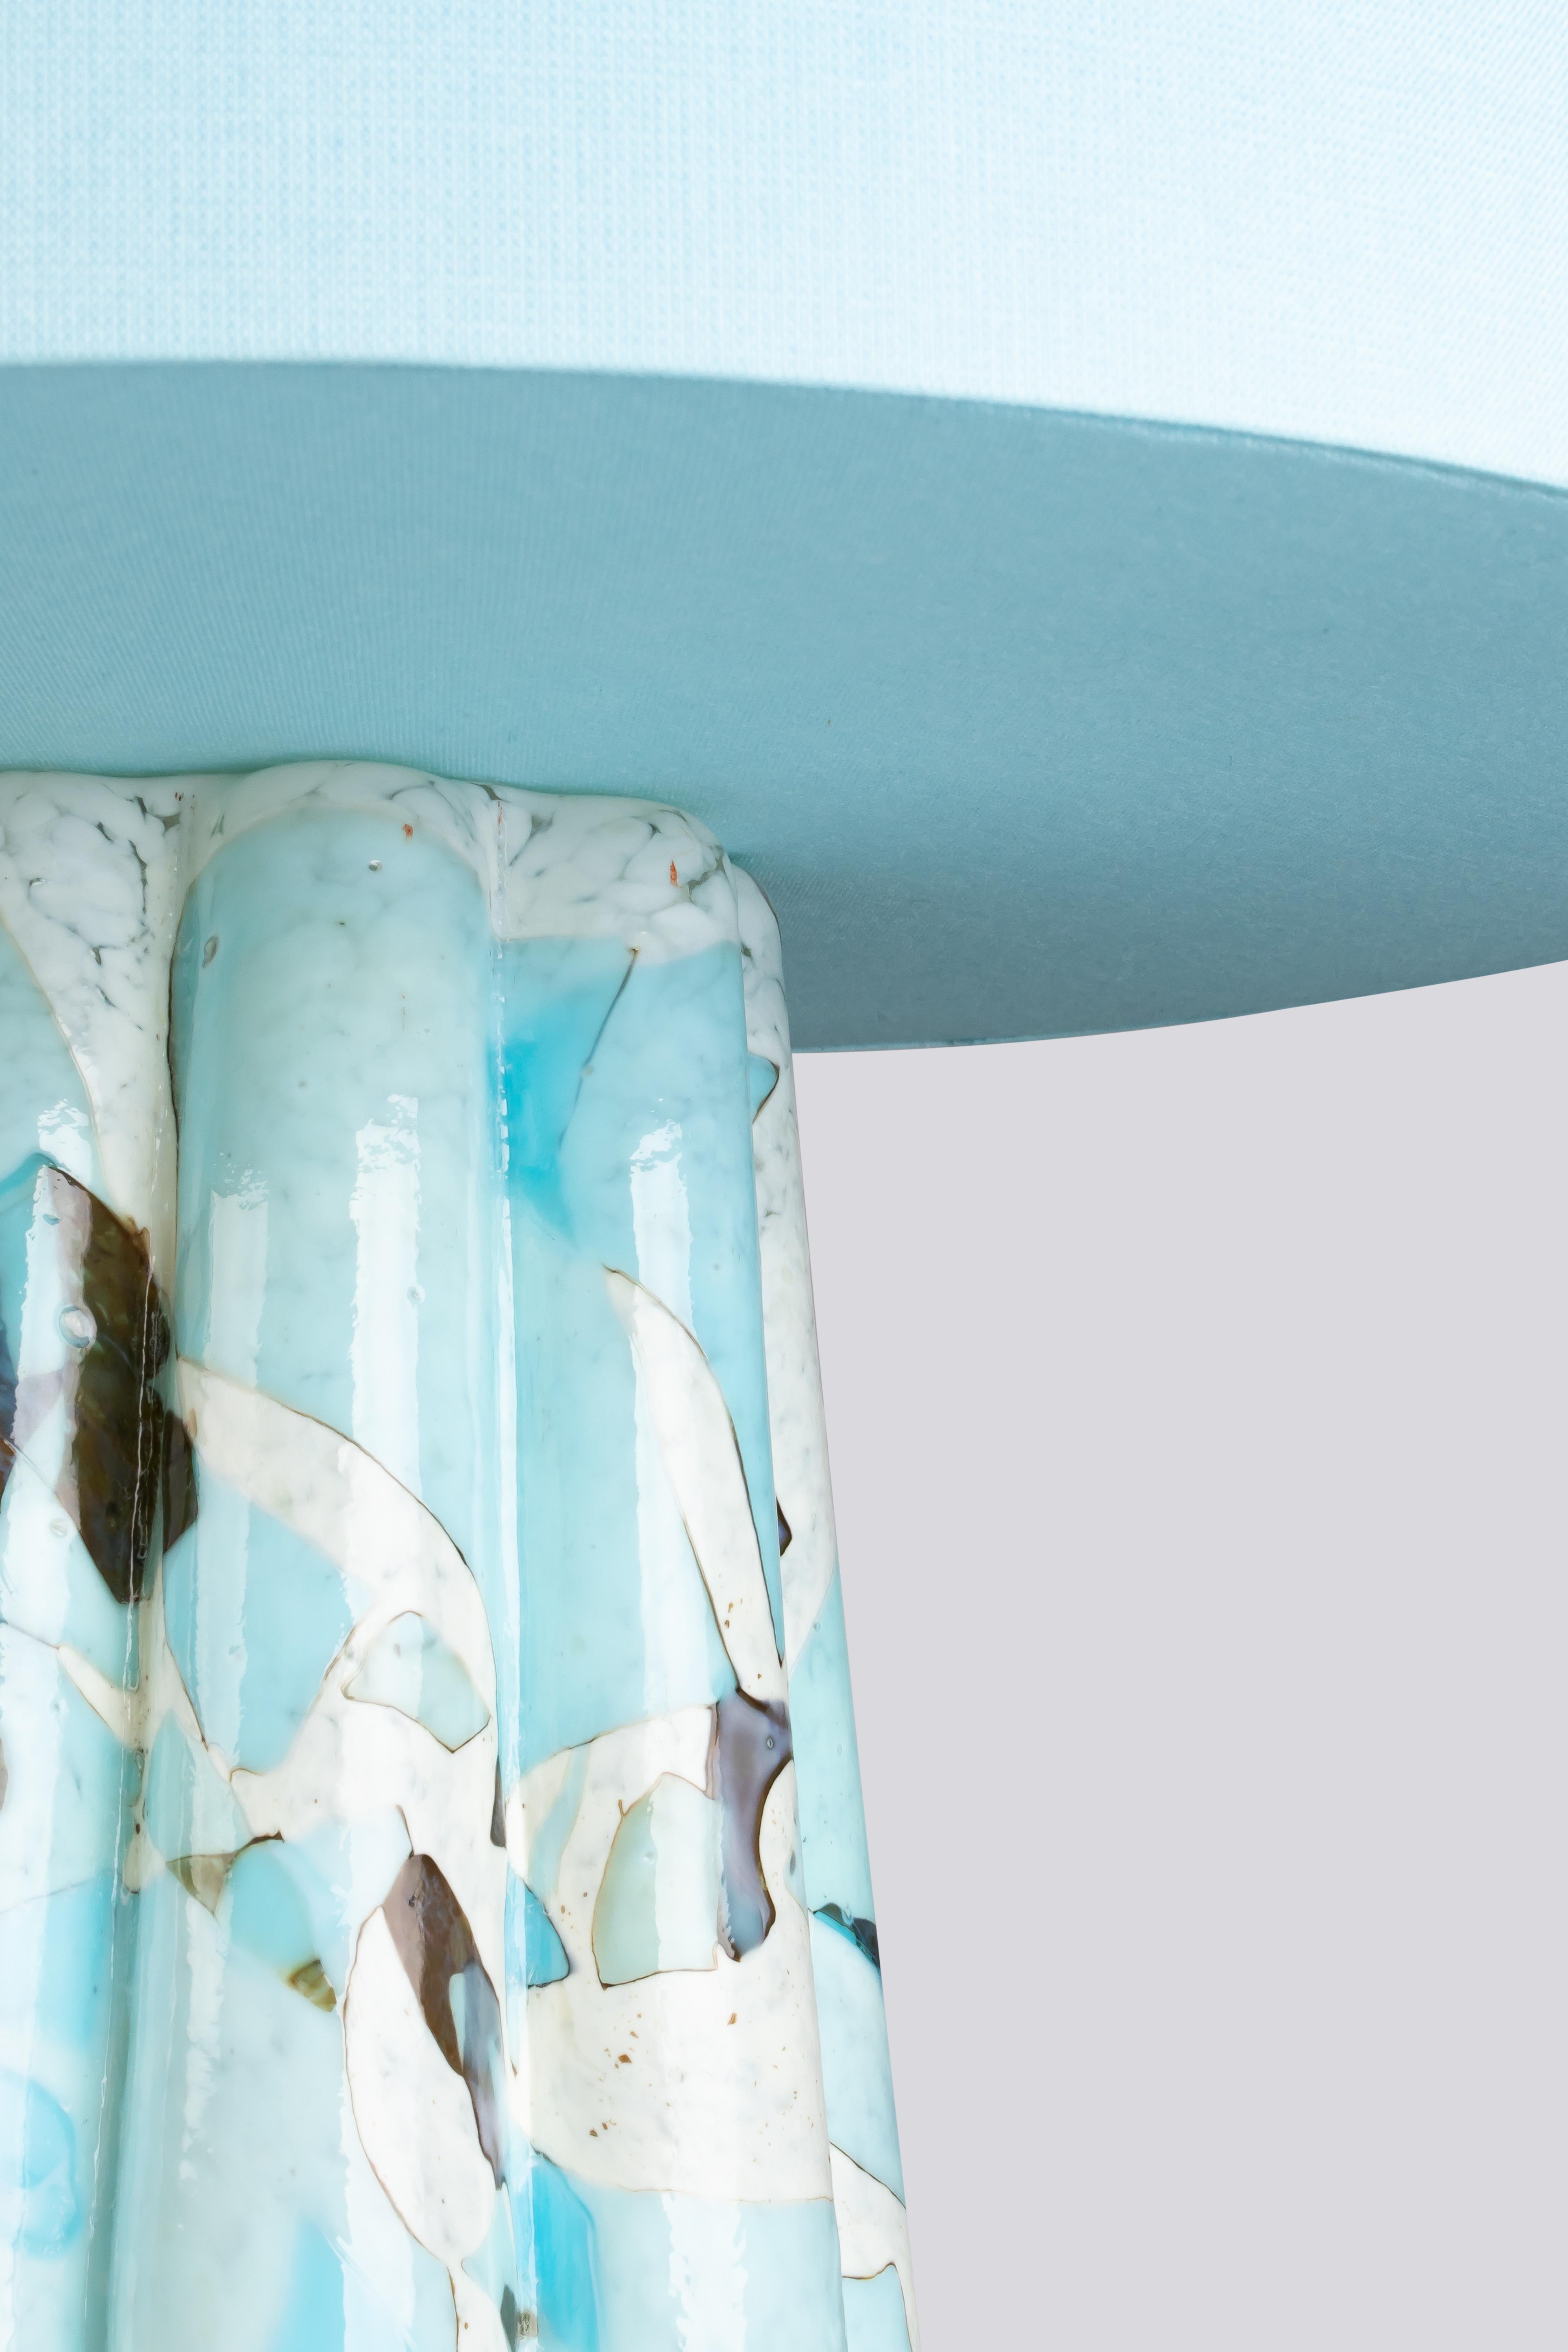 Introducing our stunning Bucket table lamp, a true testament to craftsmanship. The lamp's base, made from Murano blown glass using our renowned Nougat technique, showcases a captivating flower-shaped design with delicately melted shards of